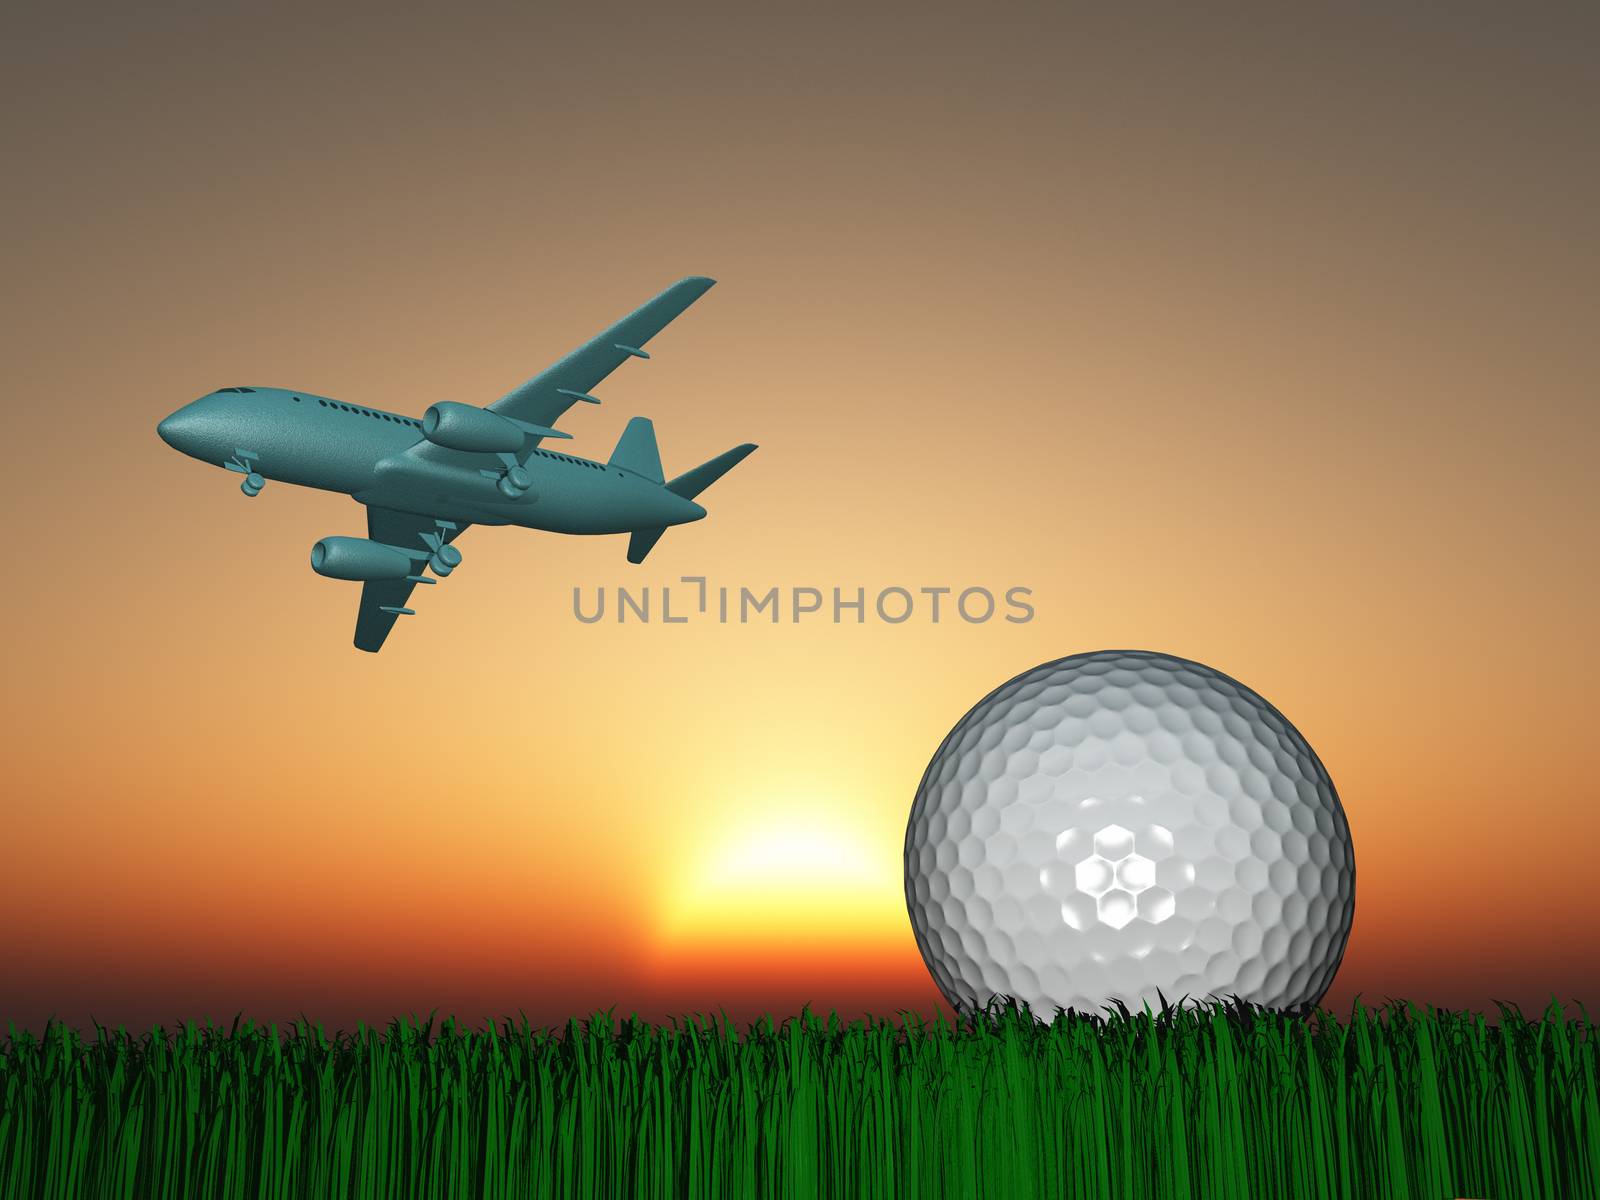 Aircraft in the sky and golf ball on green field. Sunset or sunrise